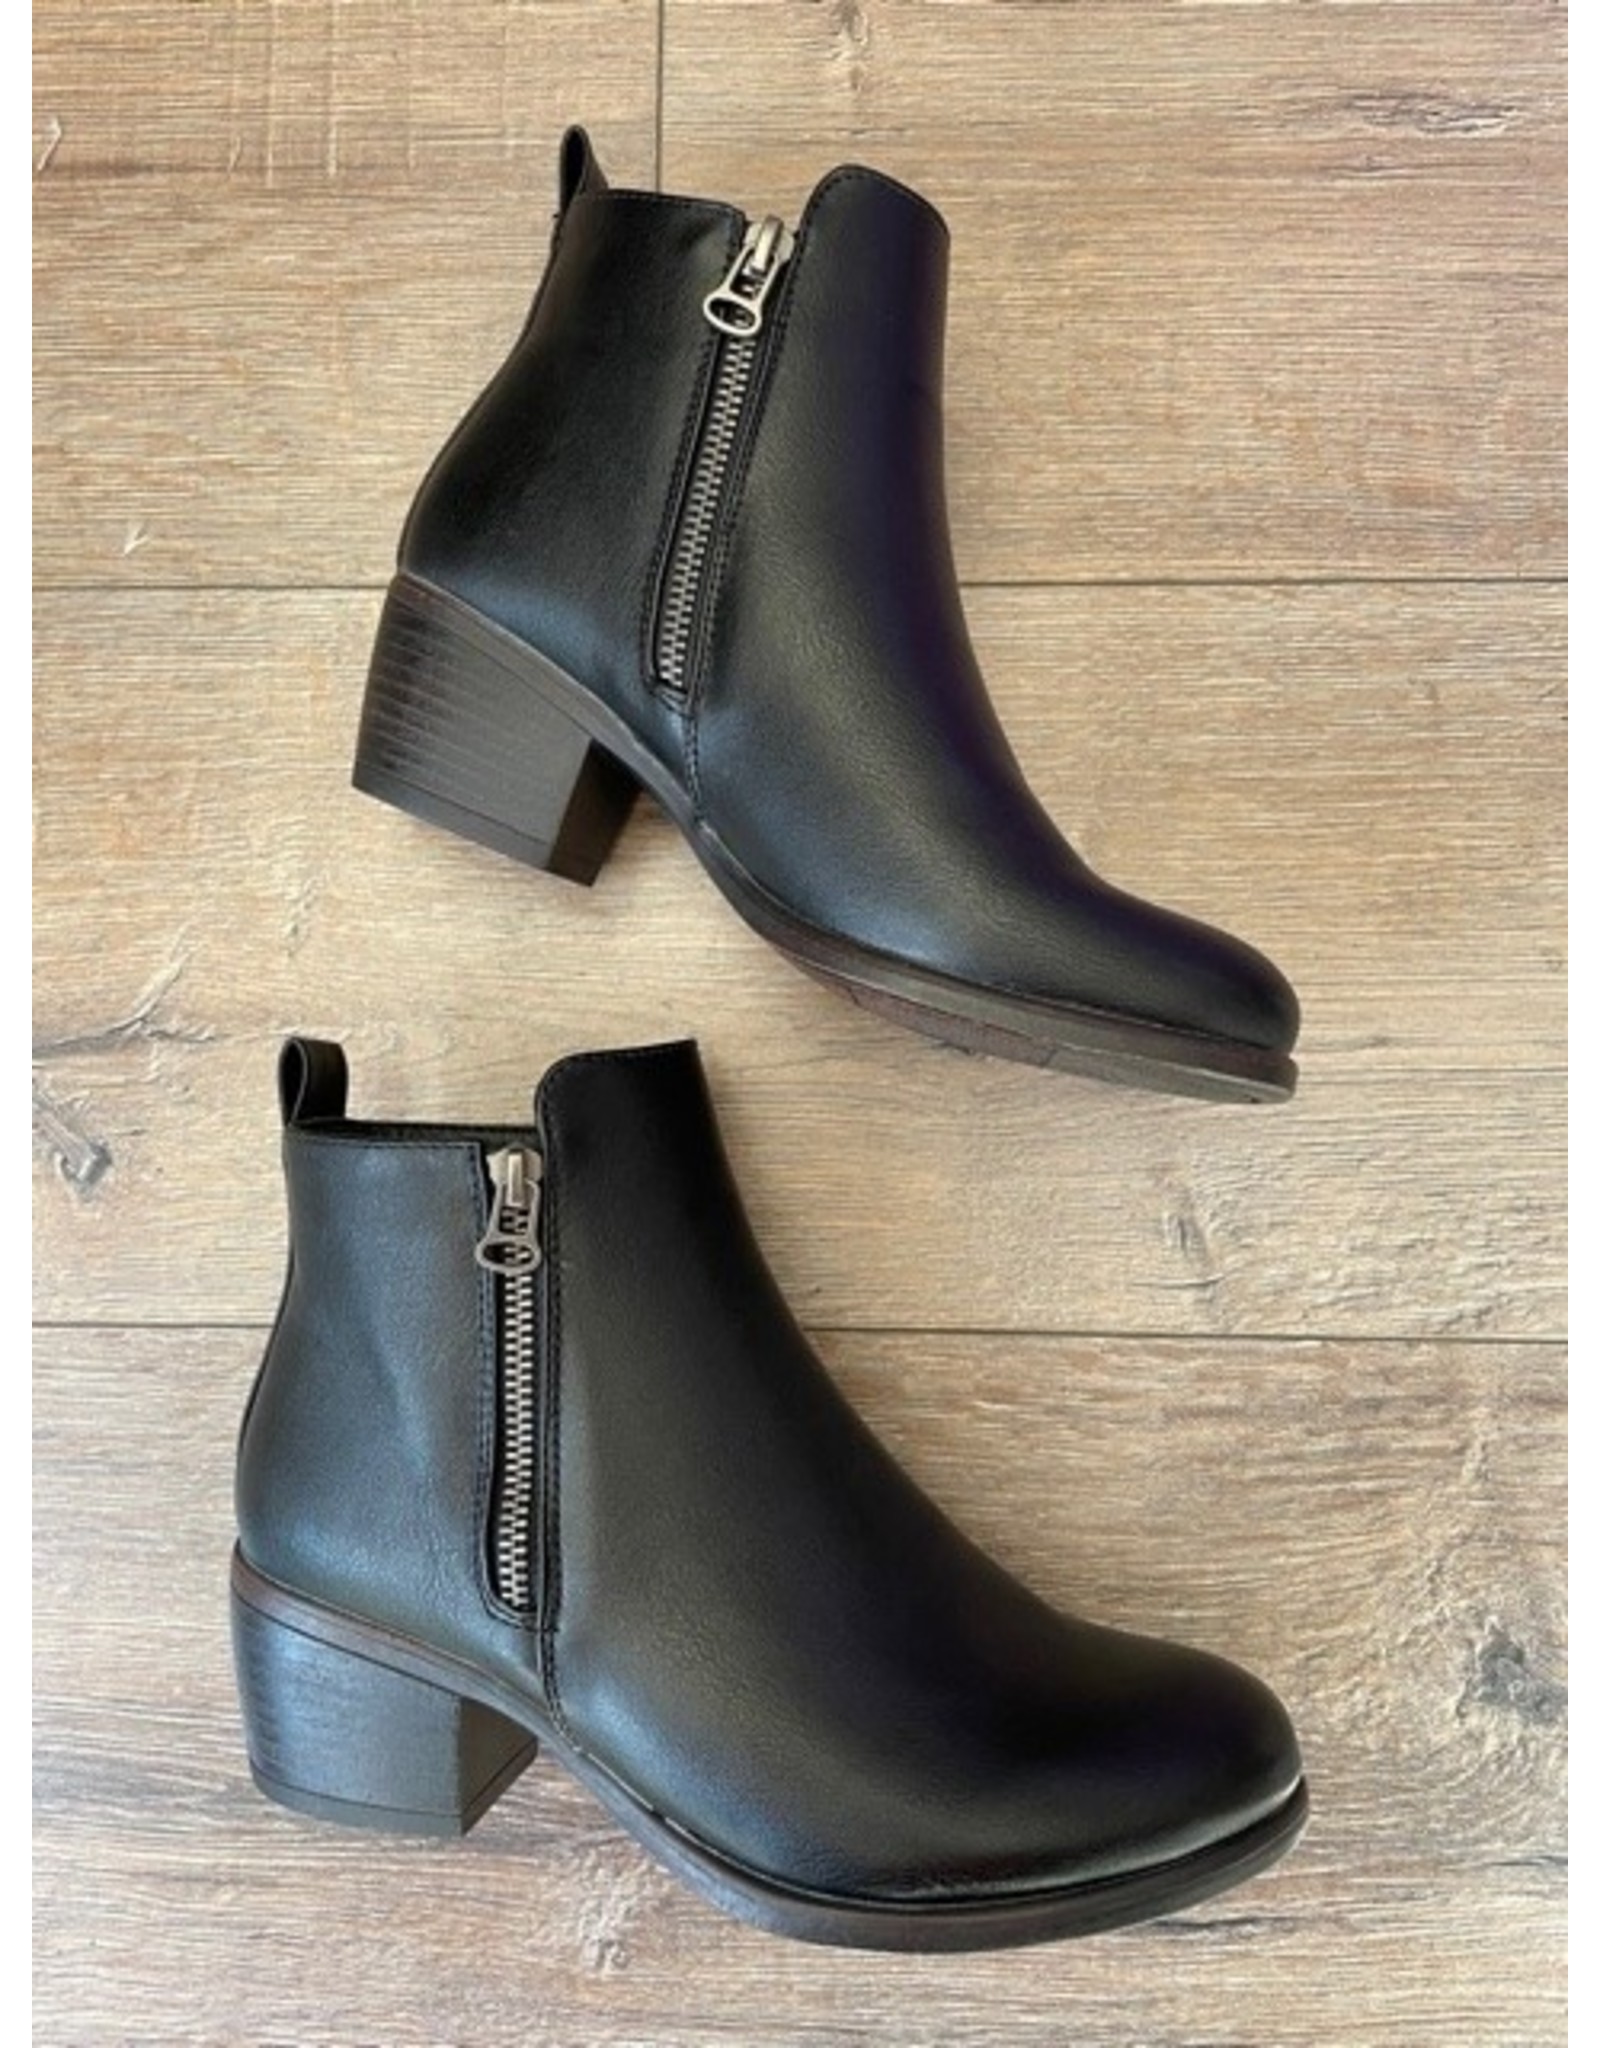 Taxi Taxi - Hailey 05 waterproof bootie (black)